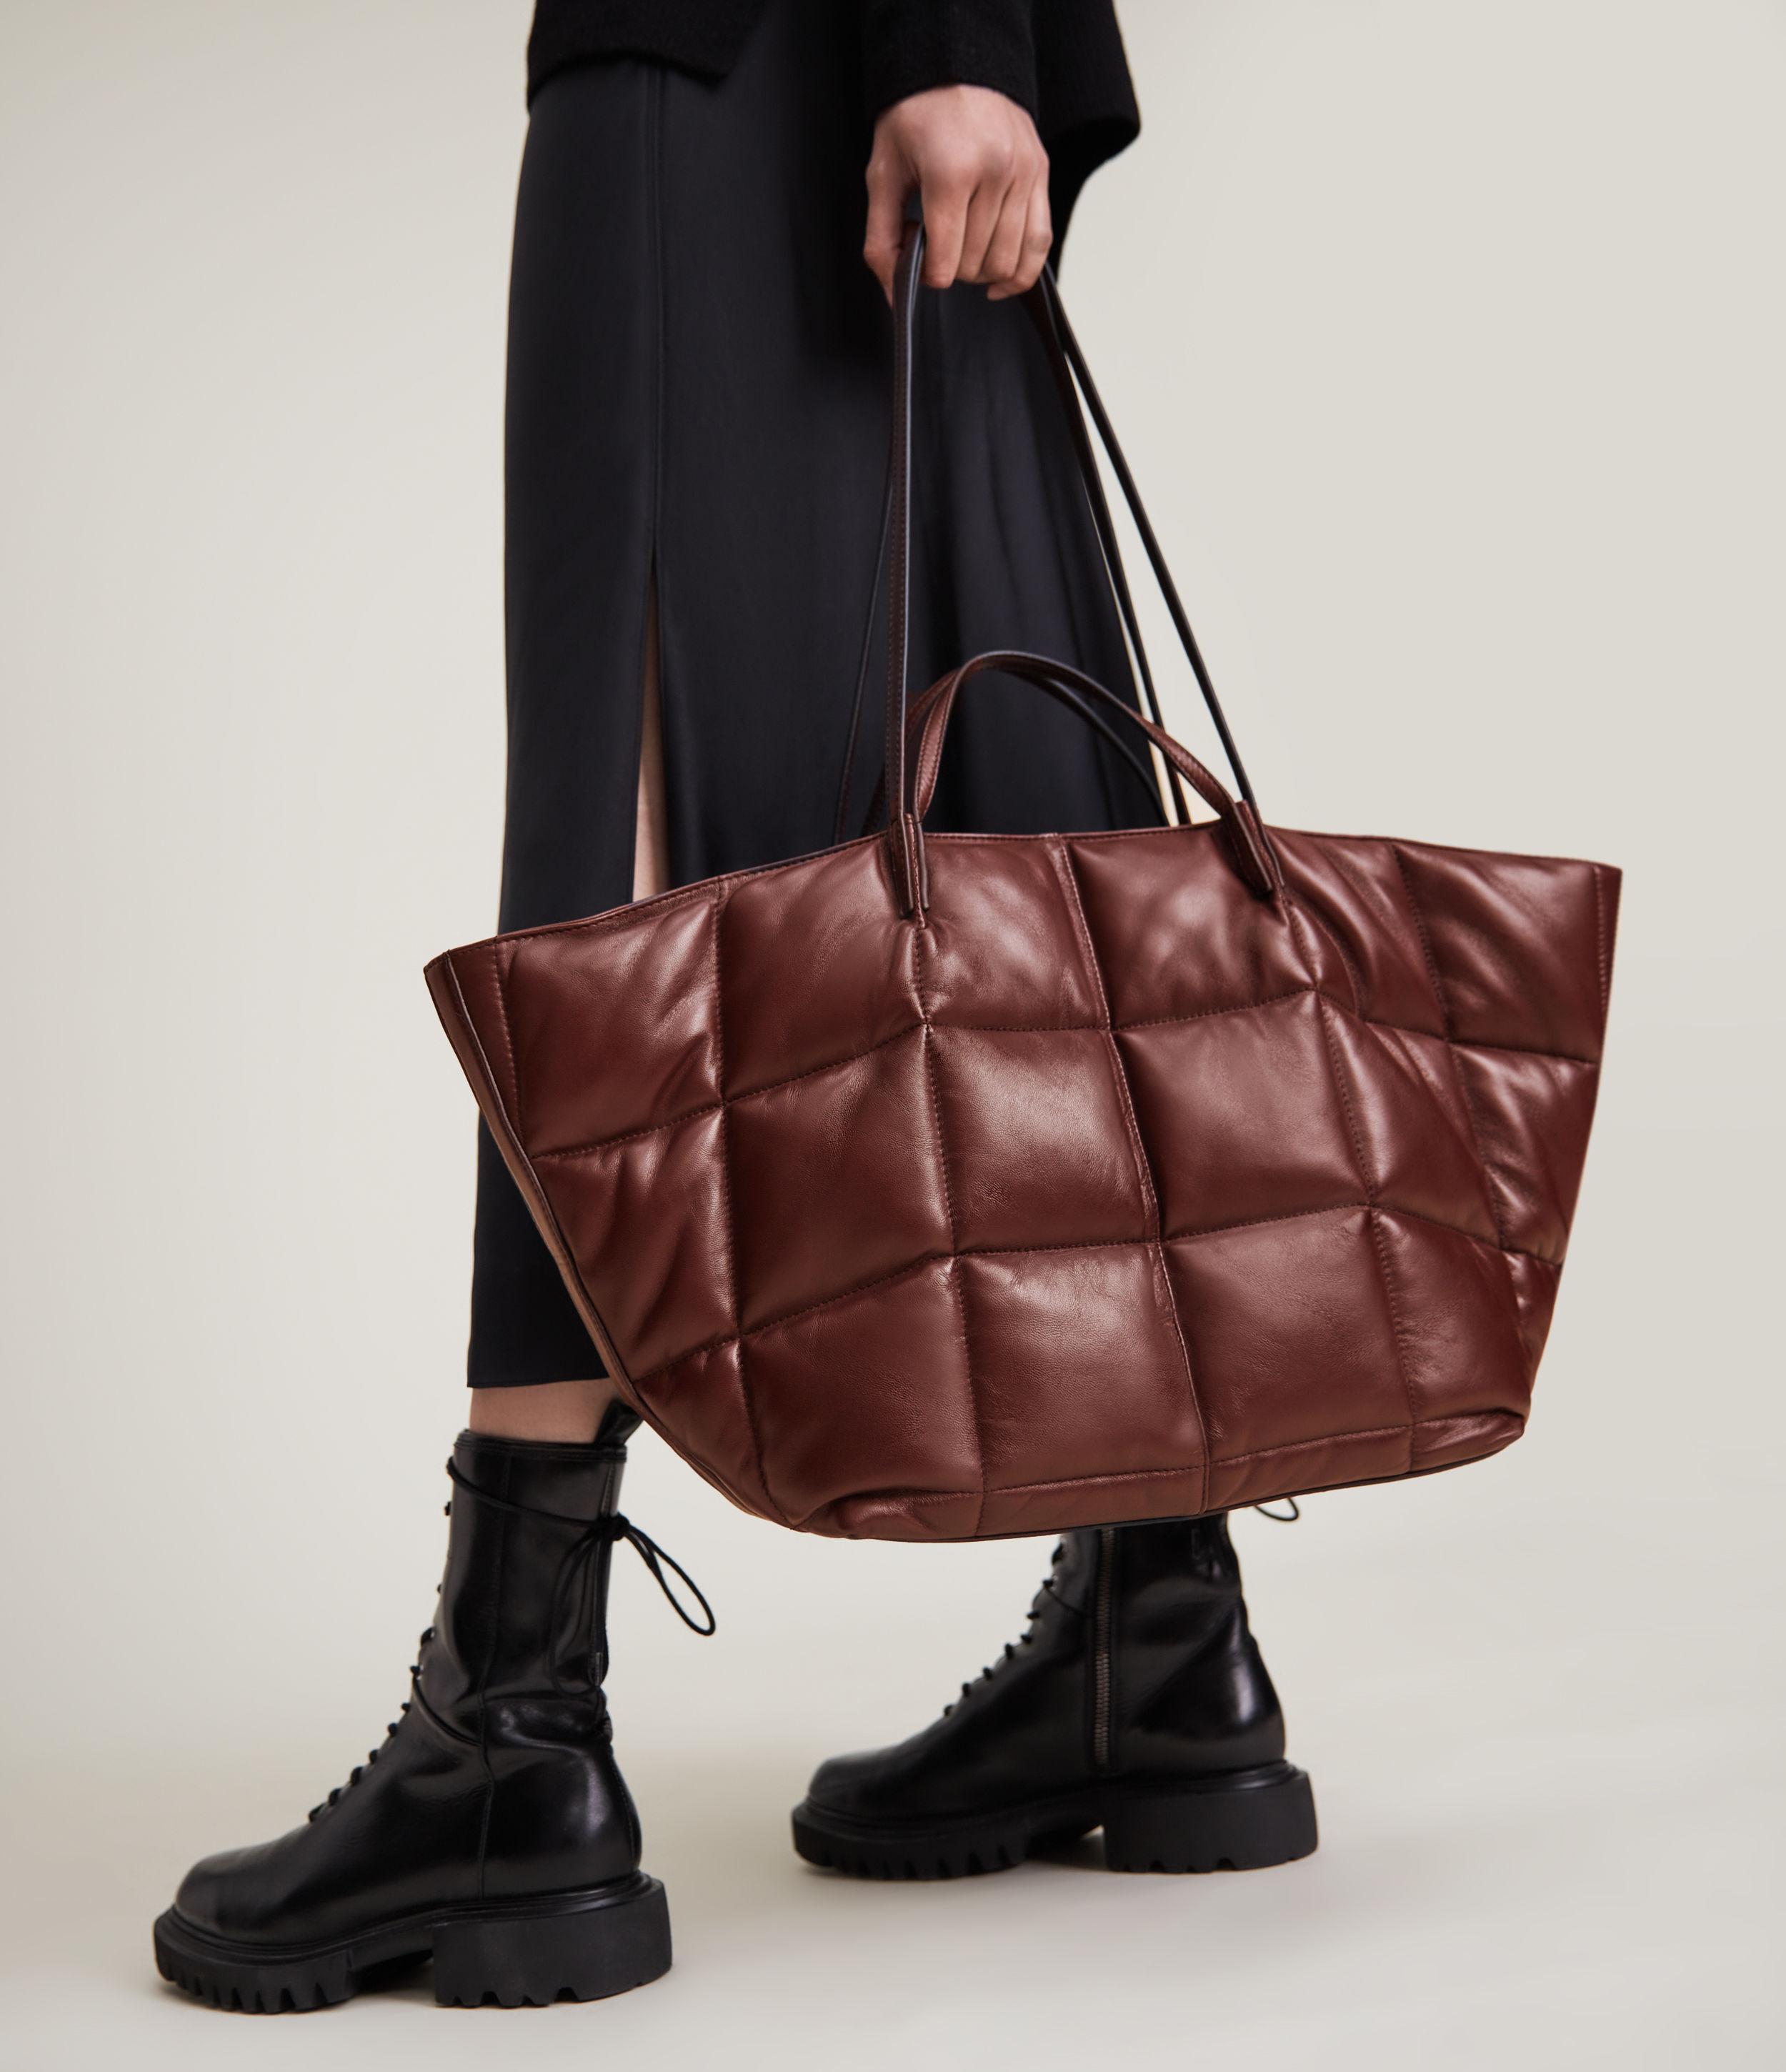 AllSaints Women's Nadaline Quilted Leather Tote Bag in Brown